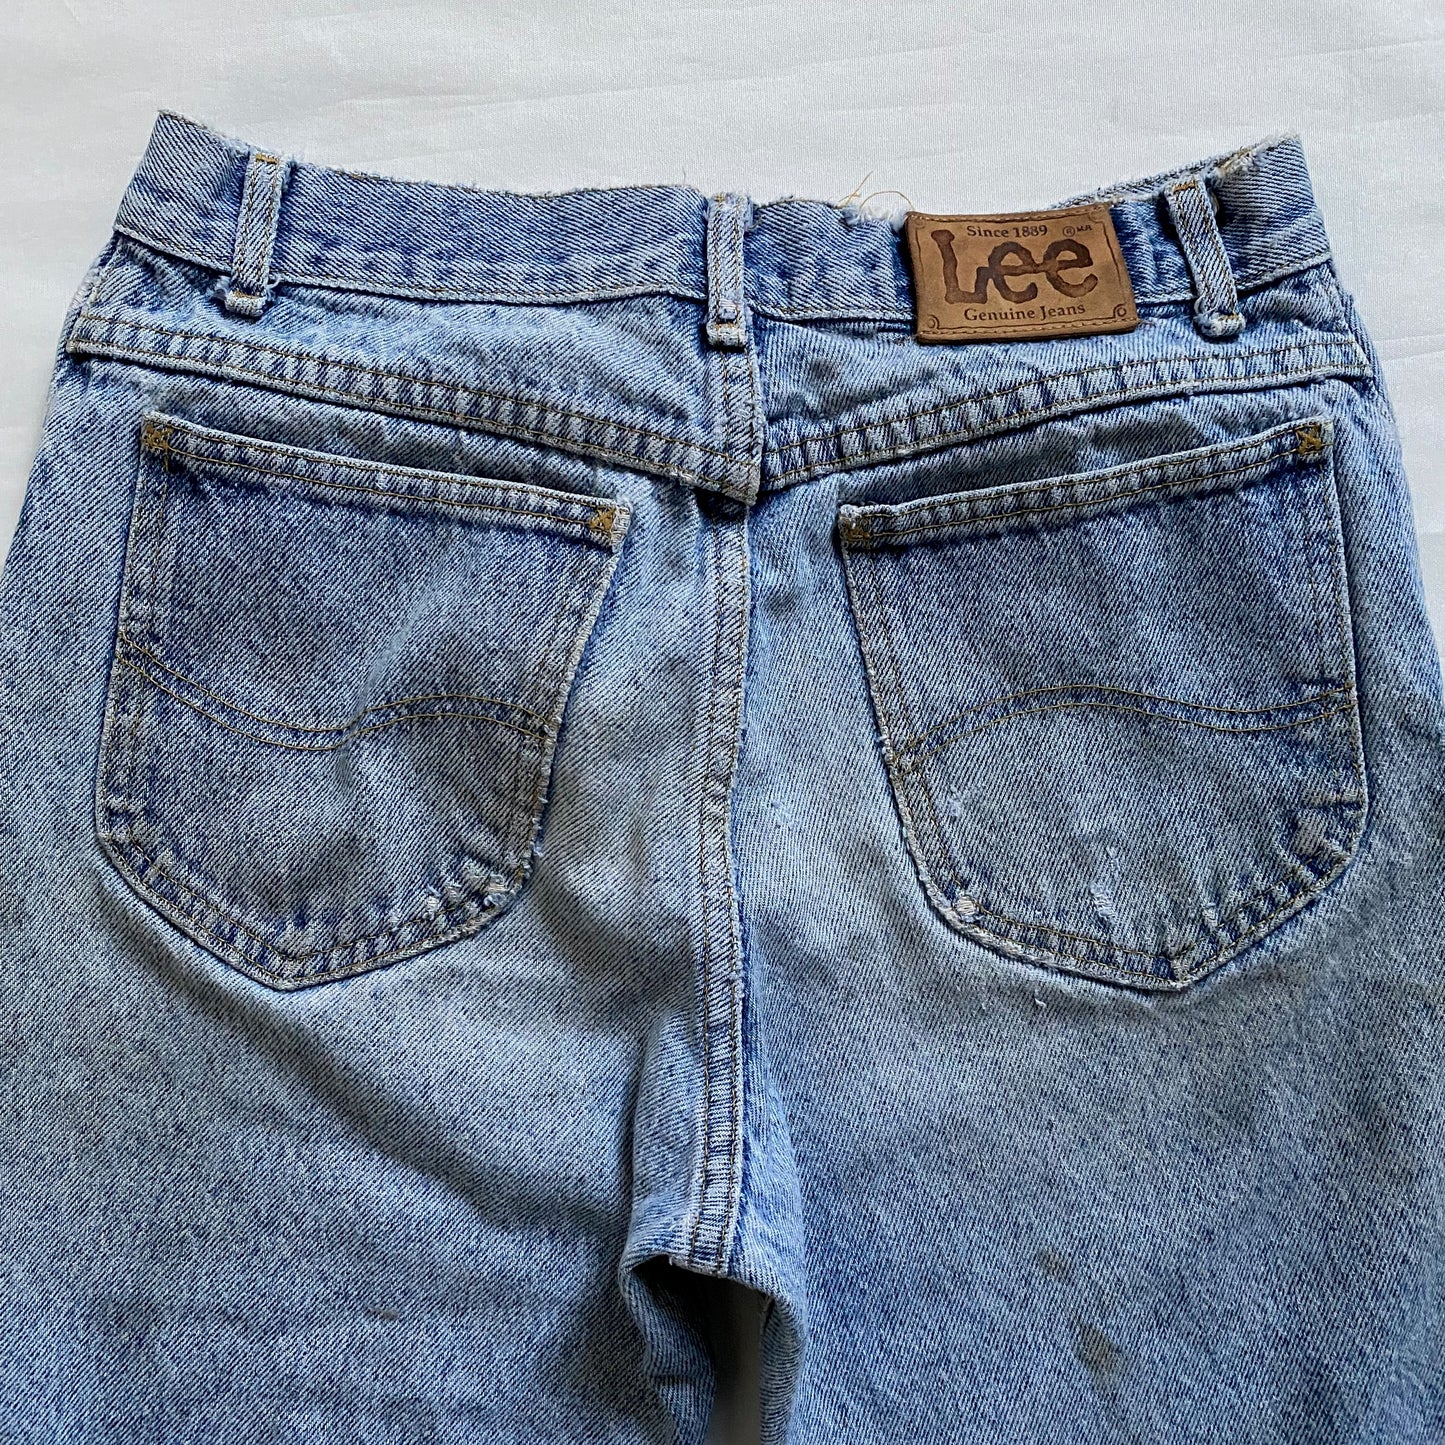 80's LEE 200-8944 "STORM RIDER" JEANS